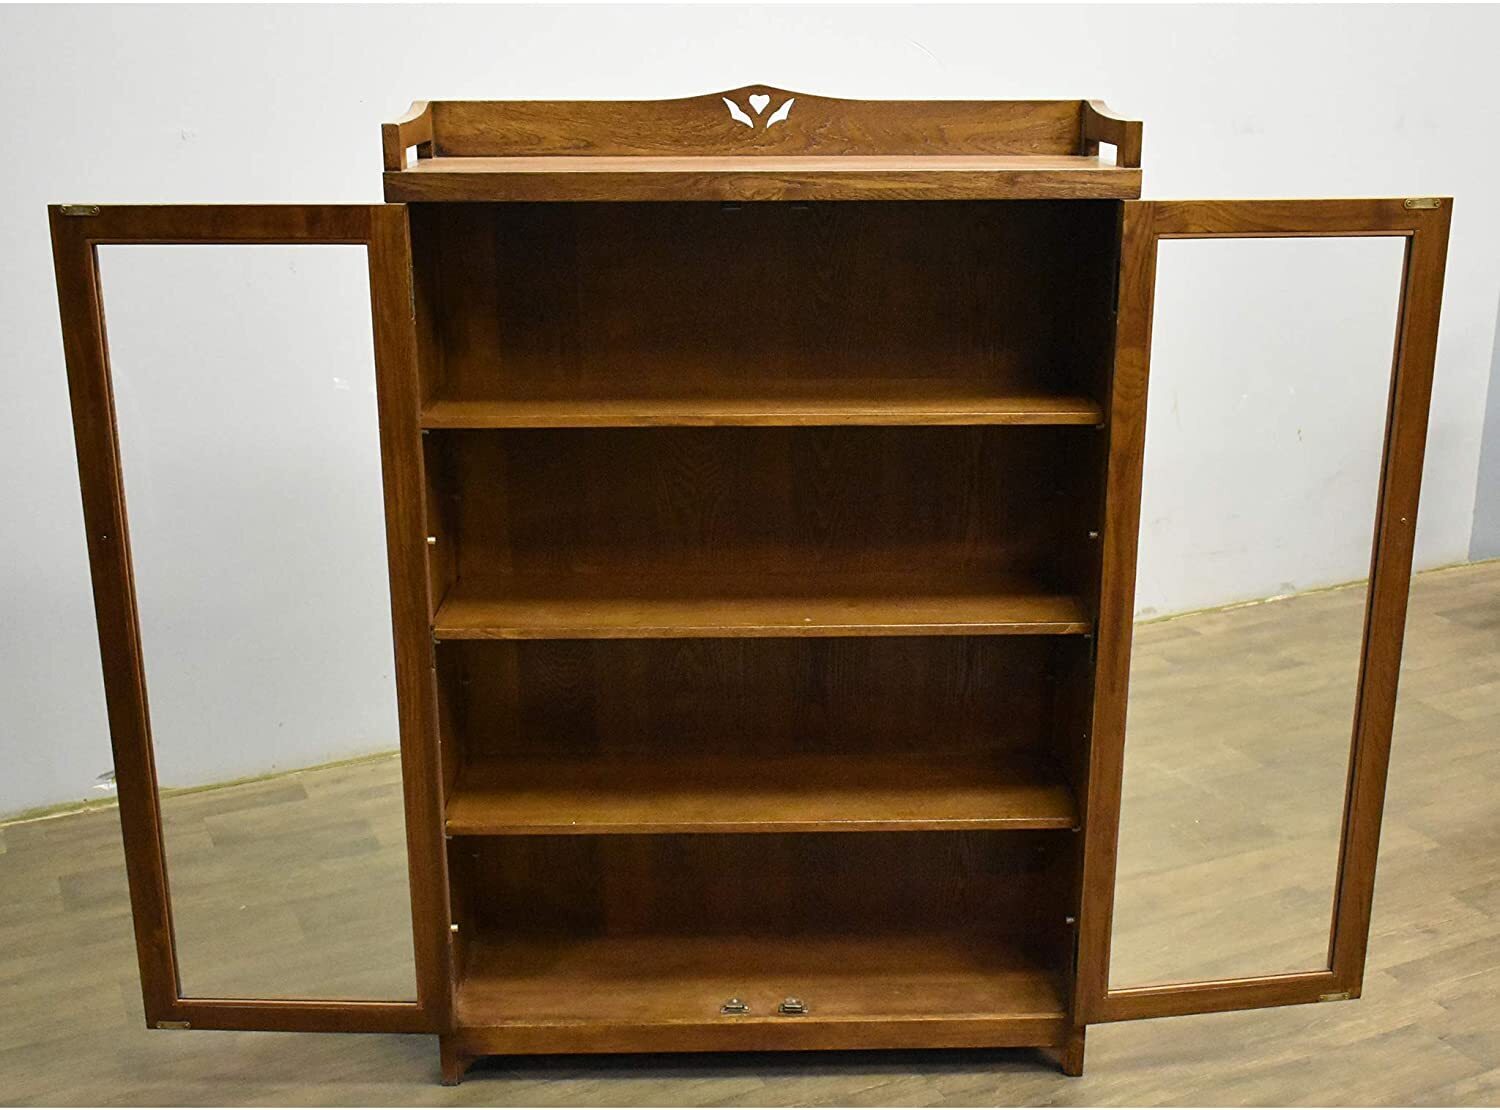 Two door bookcase with cut out detail